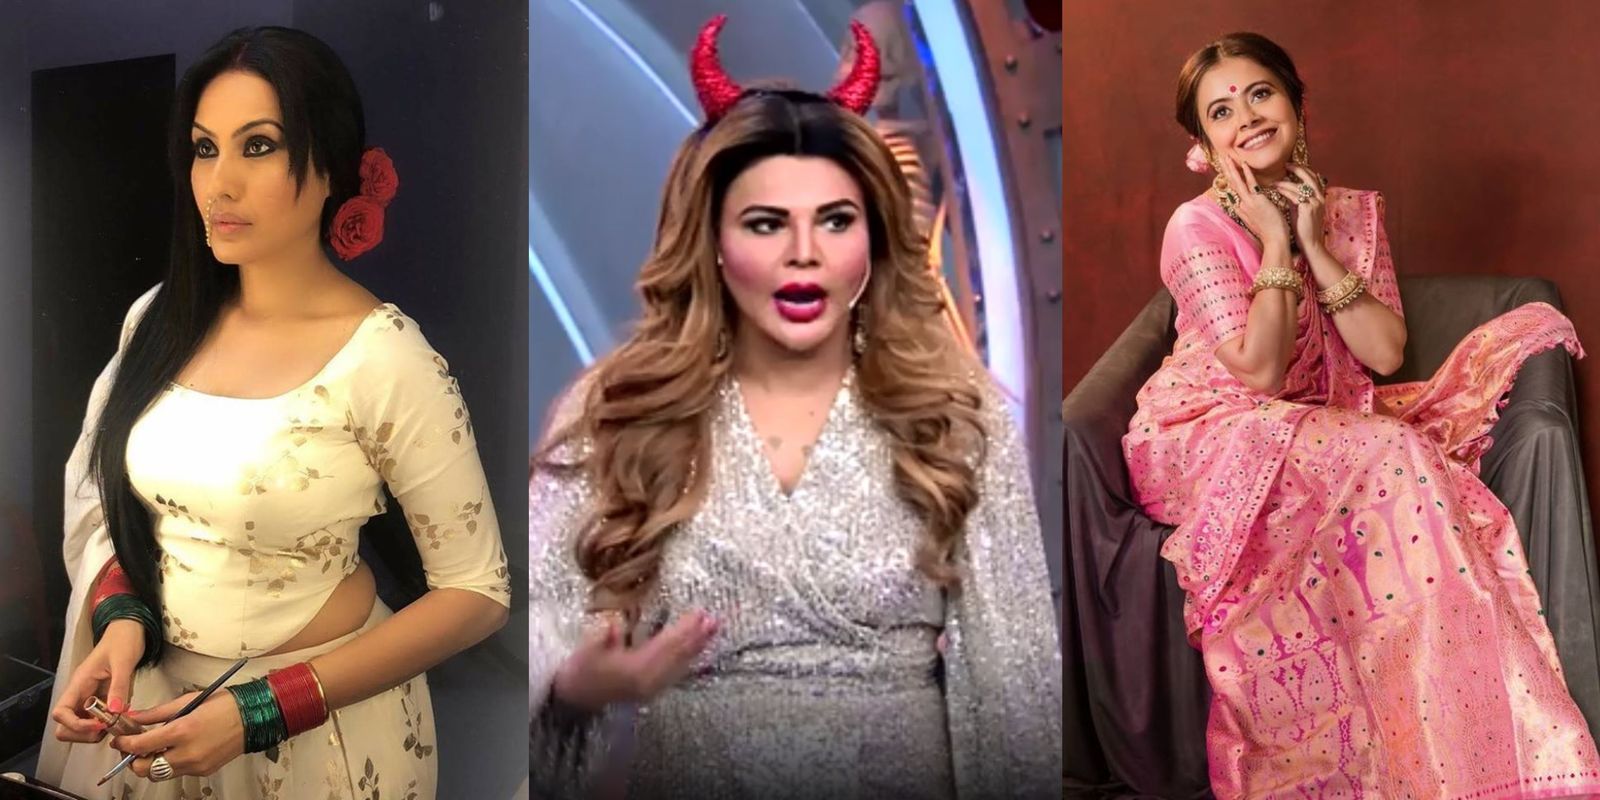 Bigg Boss 14 Finalist Rakhi Sawant Asks Fans To Pray For Her Mother As She Goes For Chemotherapy; Kamya, Devoleena Laud Her